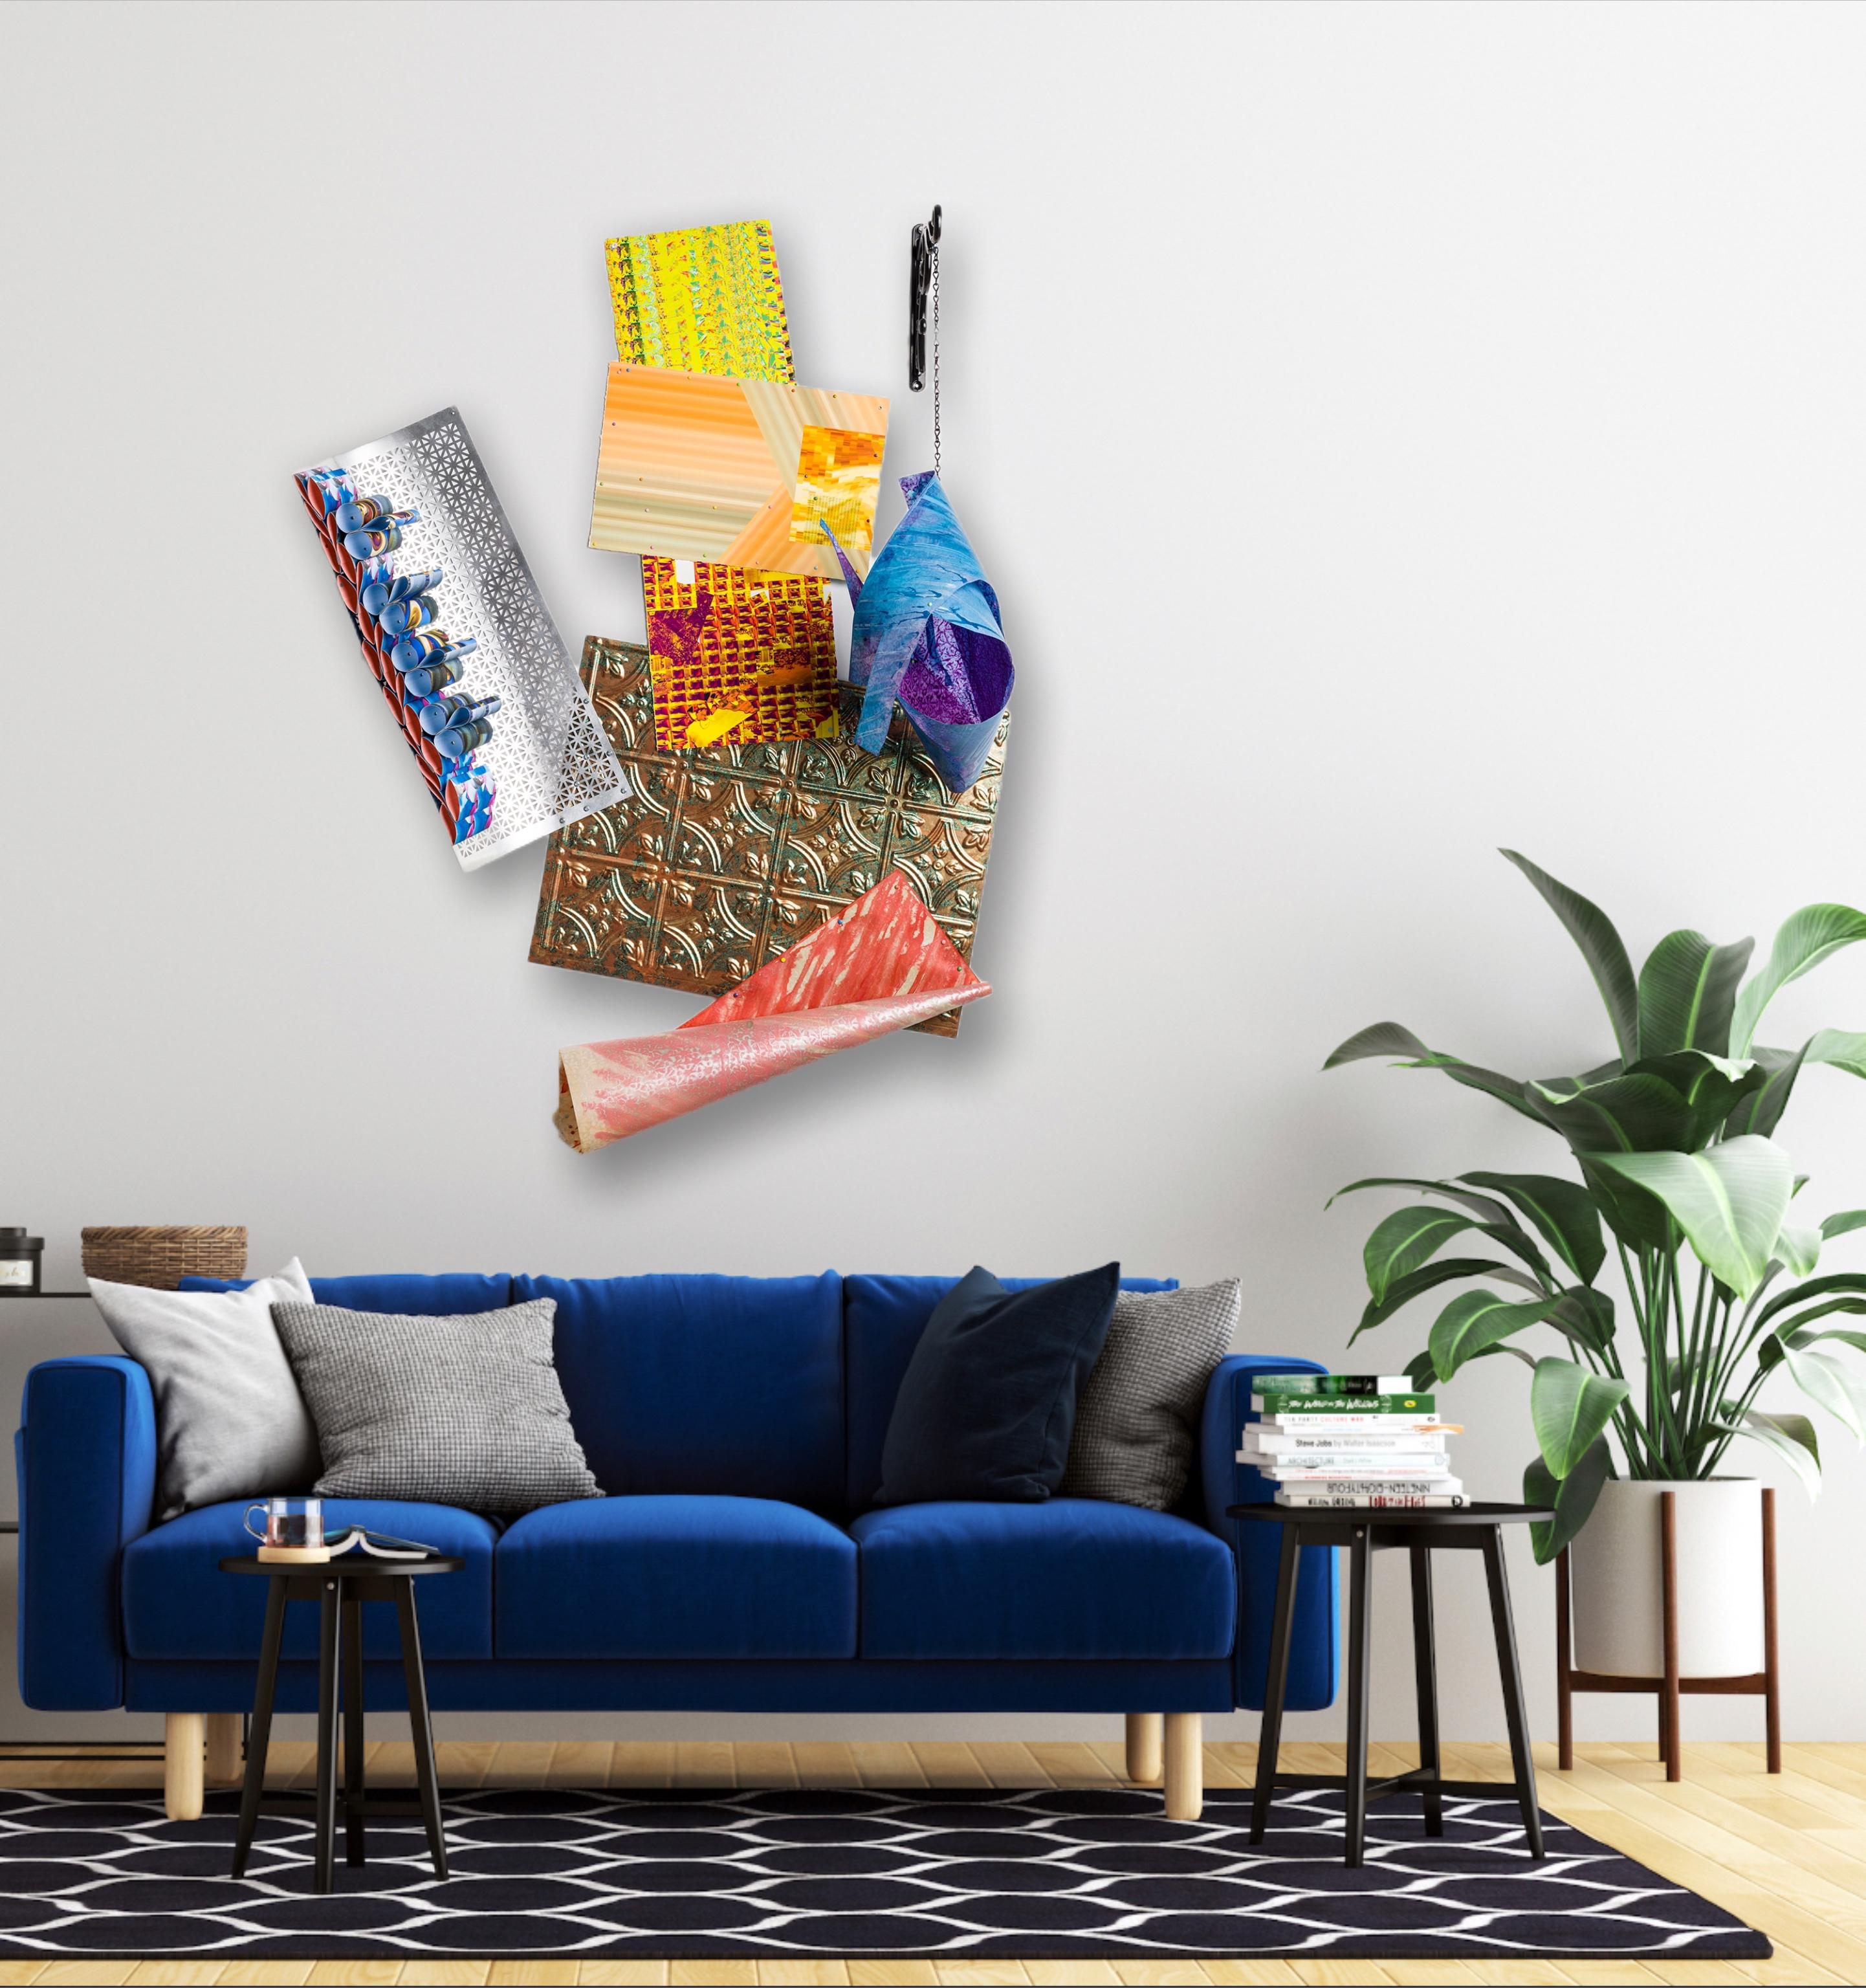 In this three-dimensional colorful artwork, the organic and geometric come together. Full of layers of texture and joyful materiality, the work shifts in it's perception from every angle due to it's sculptural form. The artist created these to hang